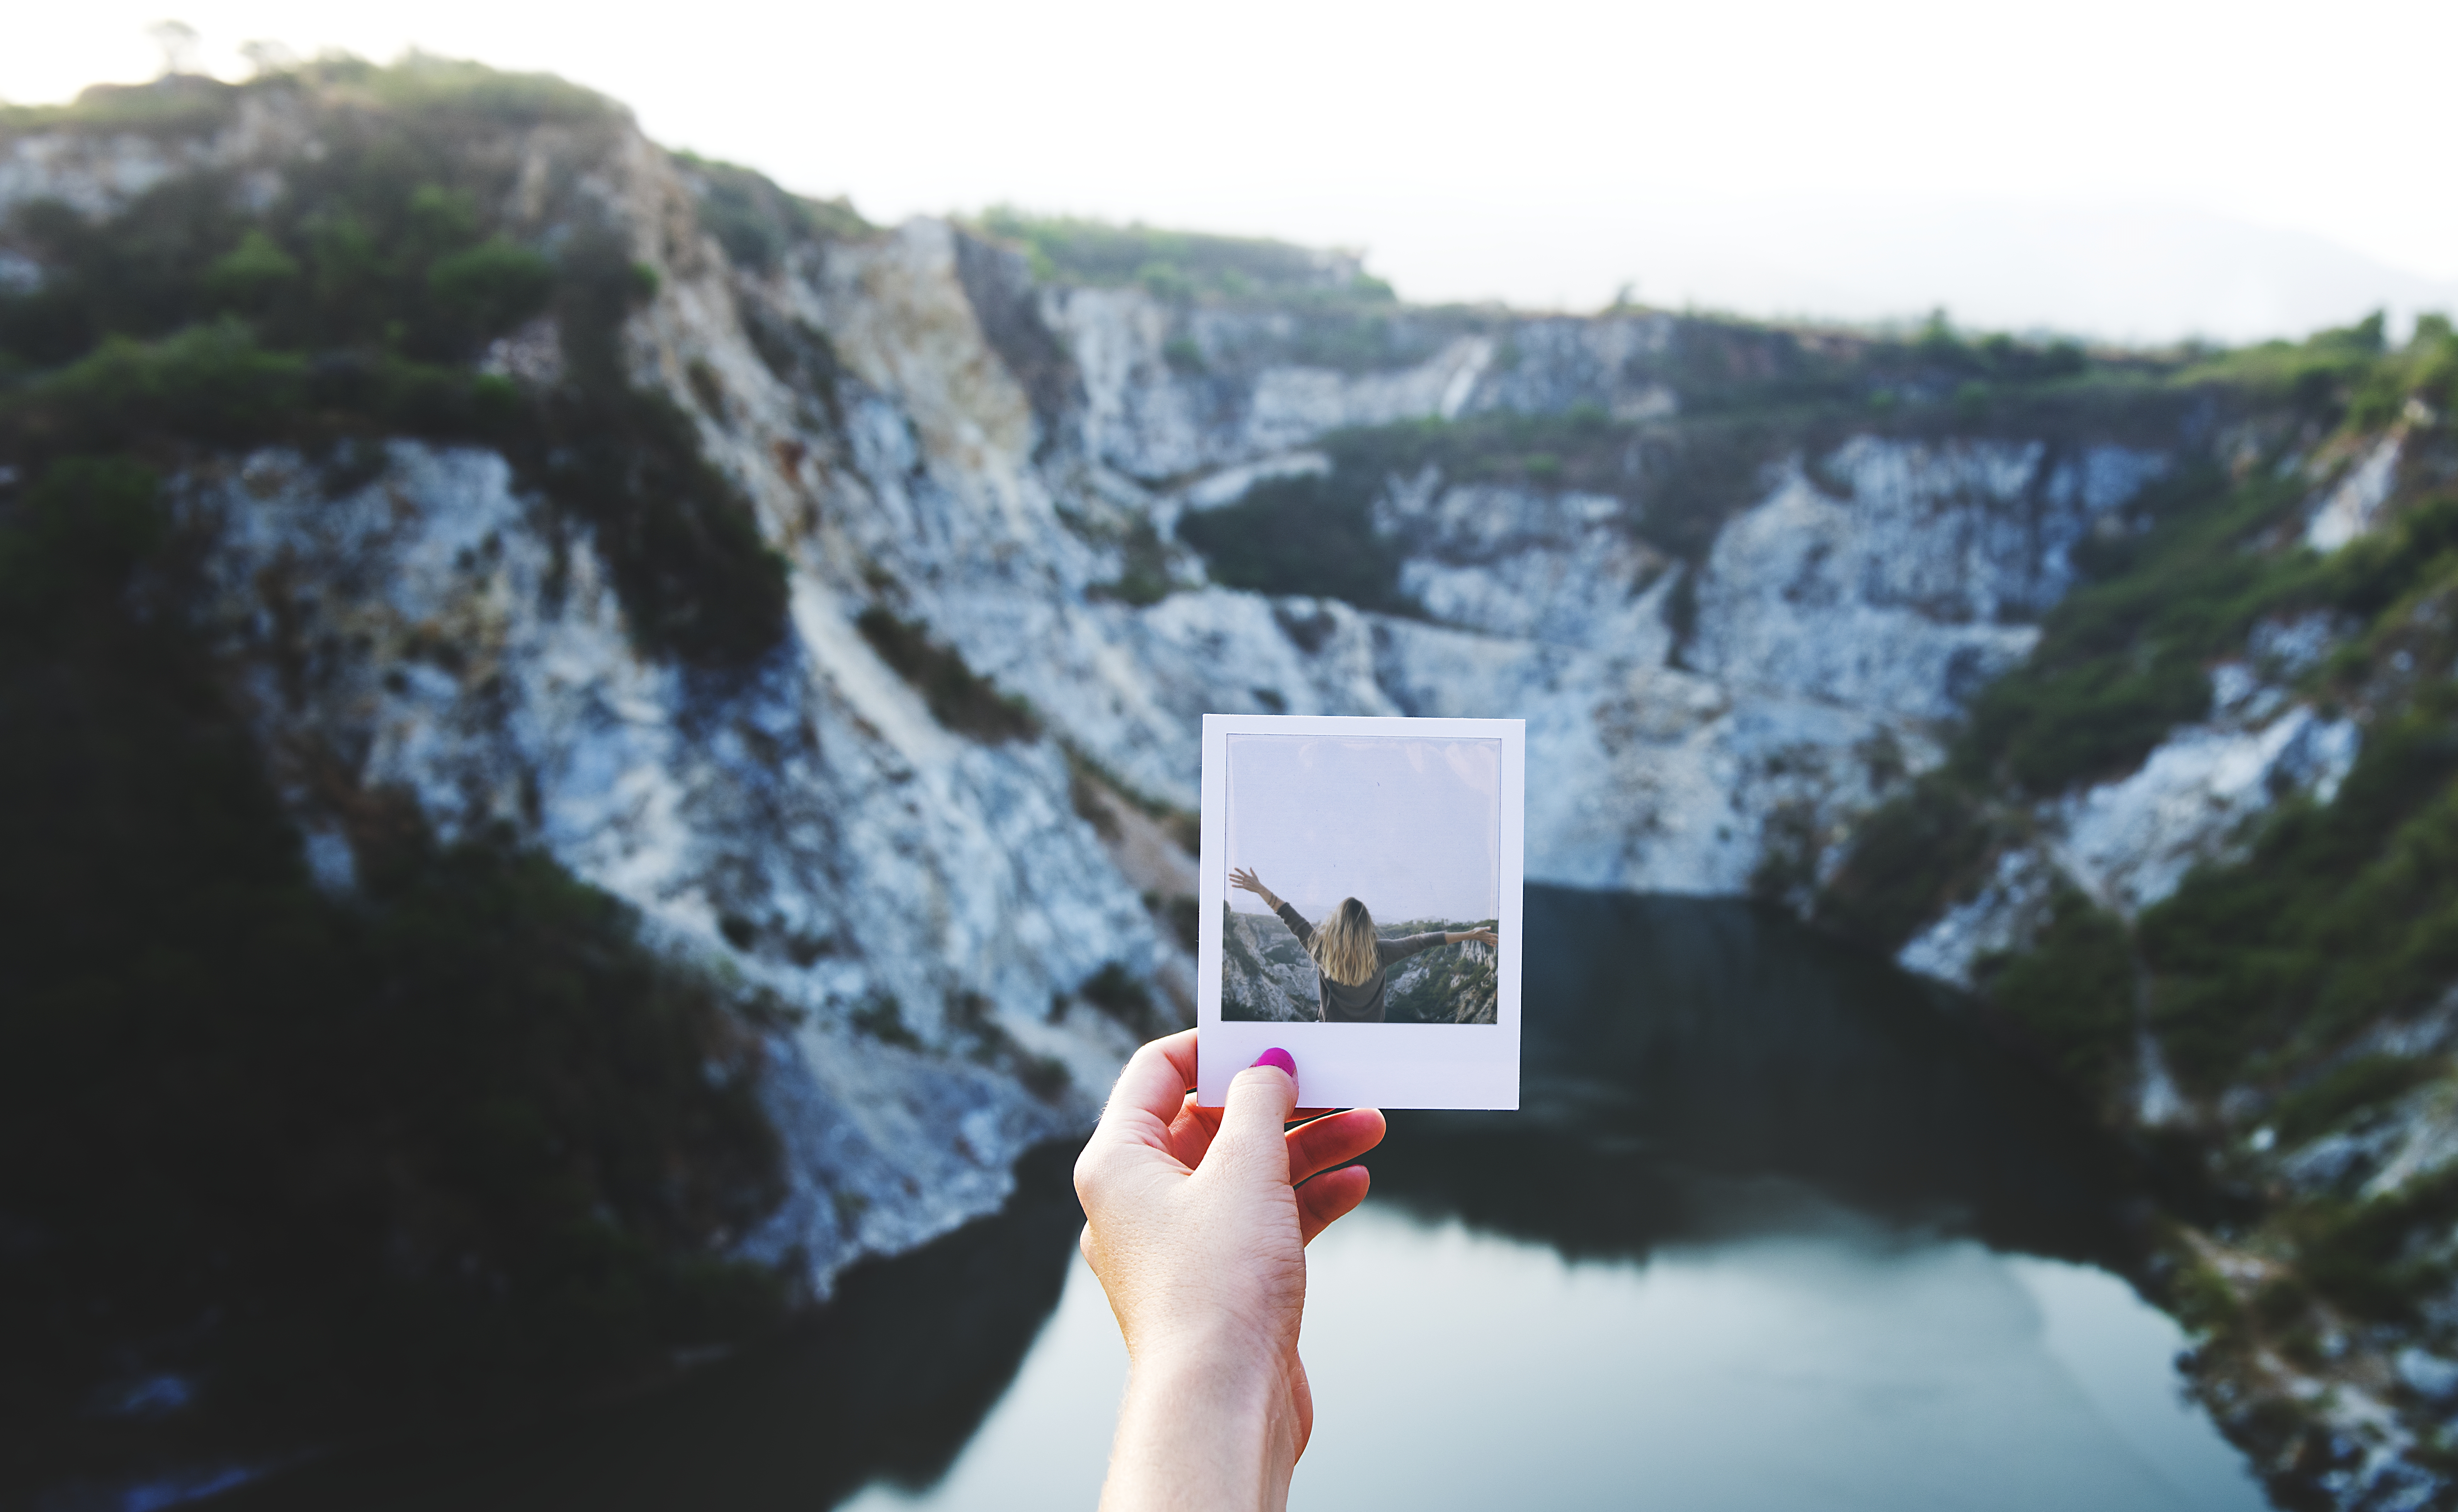 POV shot of a an outstretched hand holding a polaroid photo while standing in the mountains